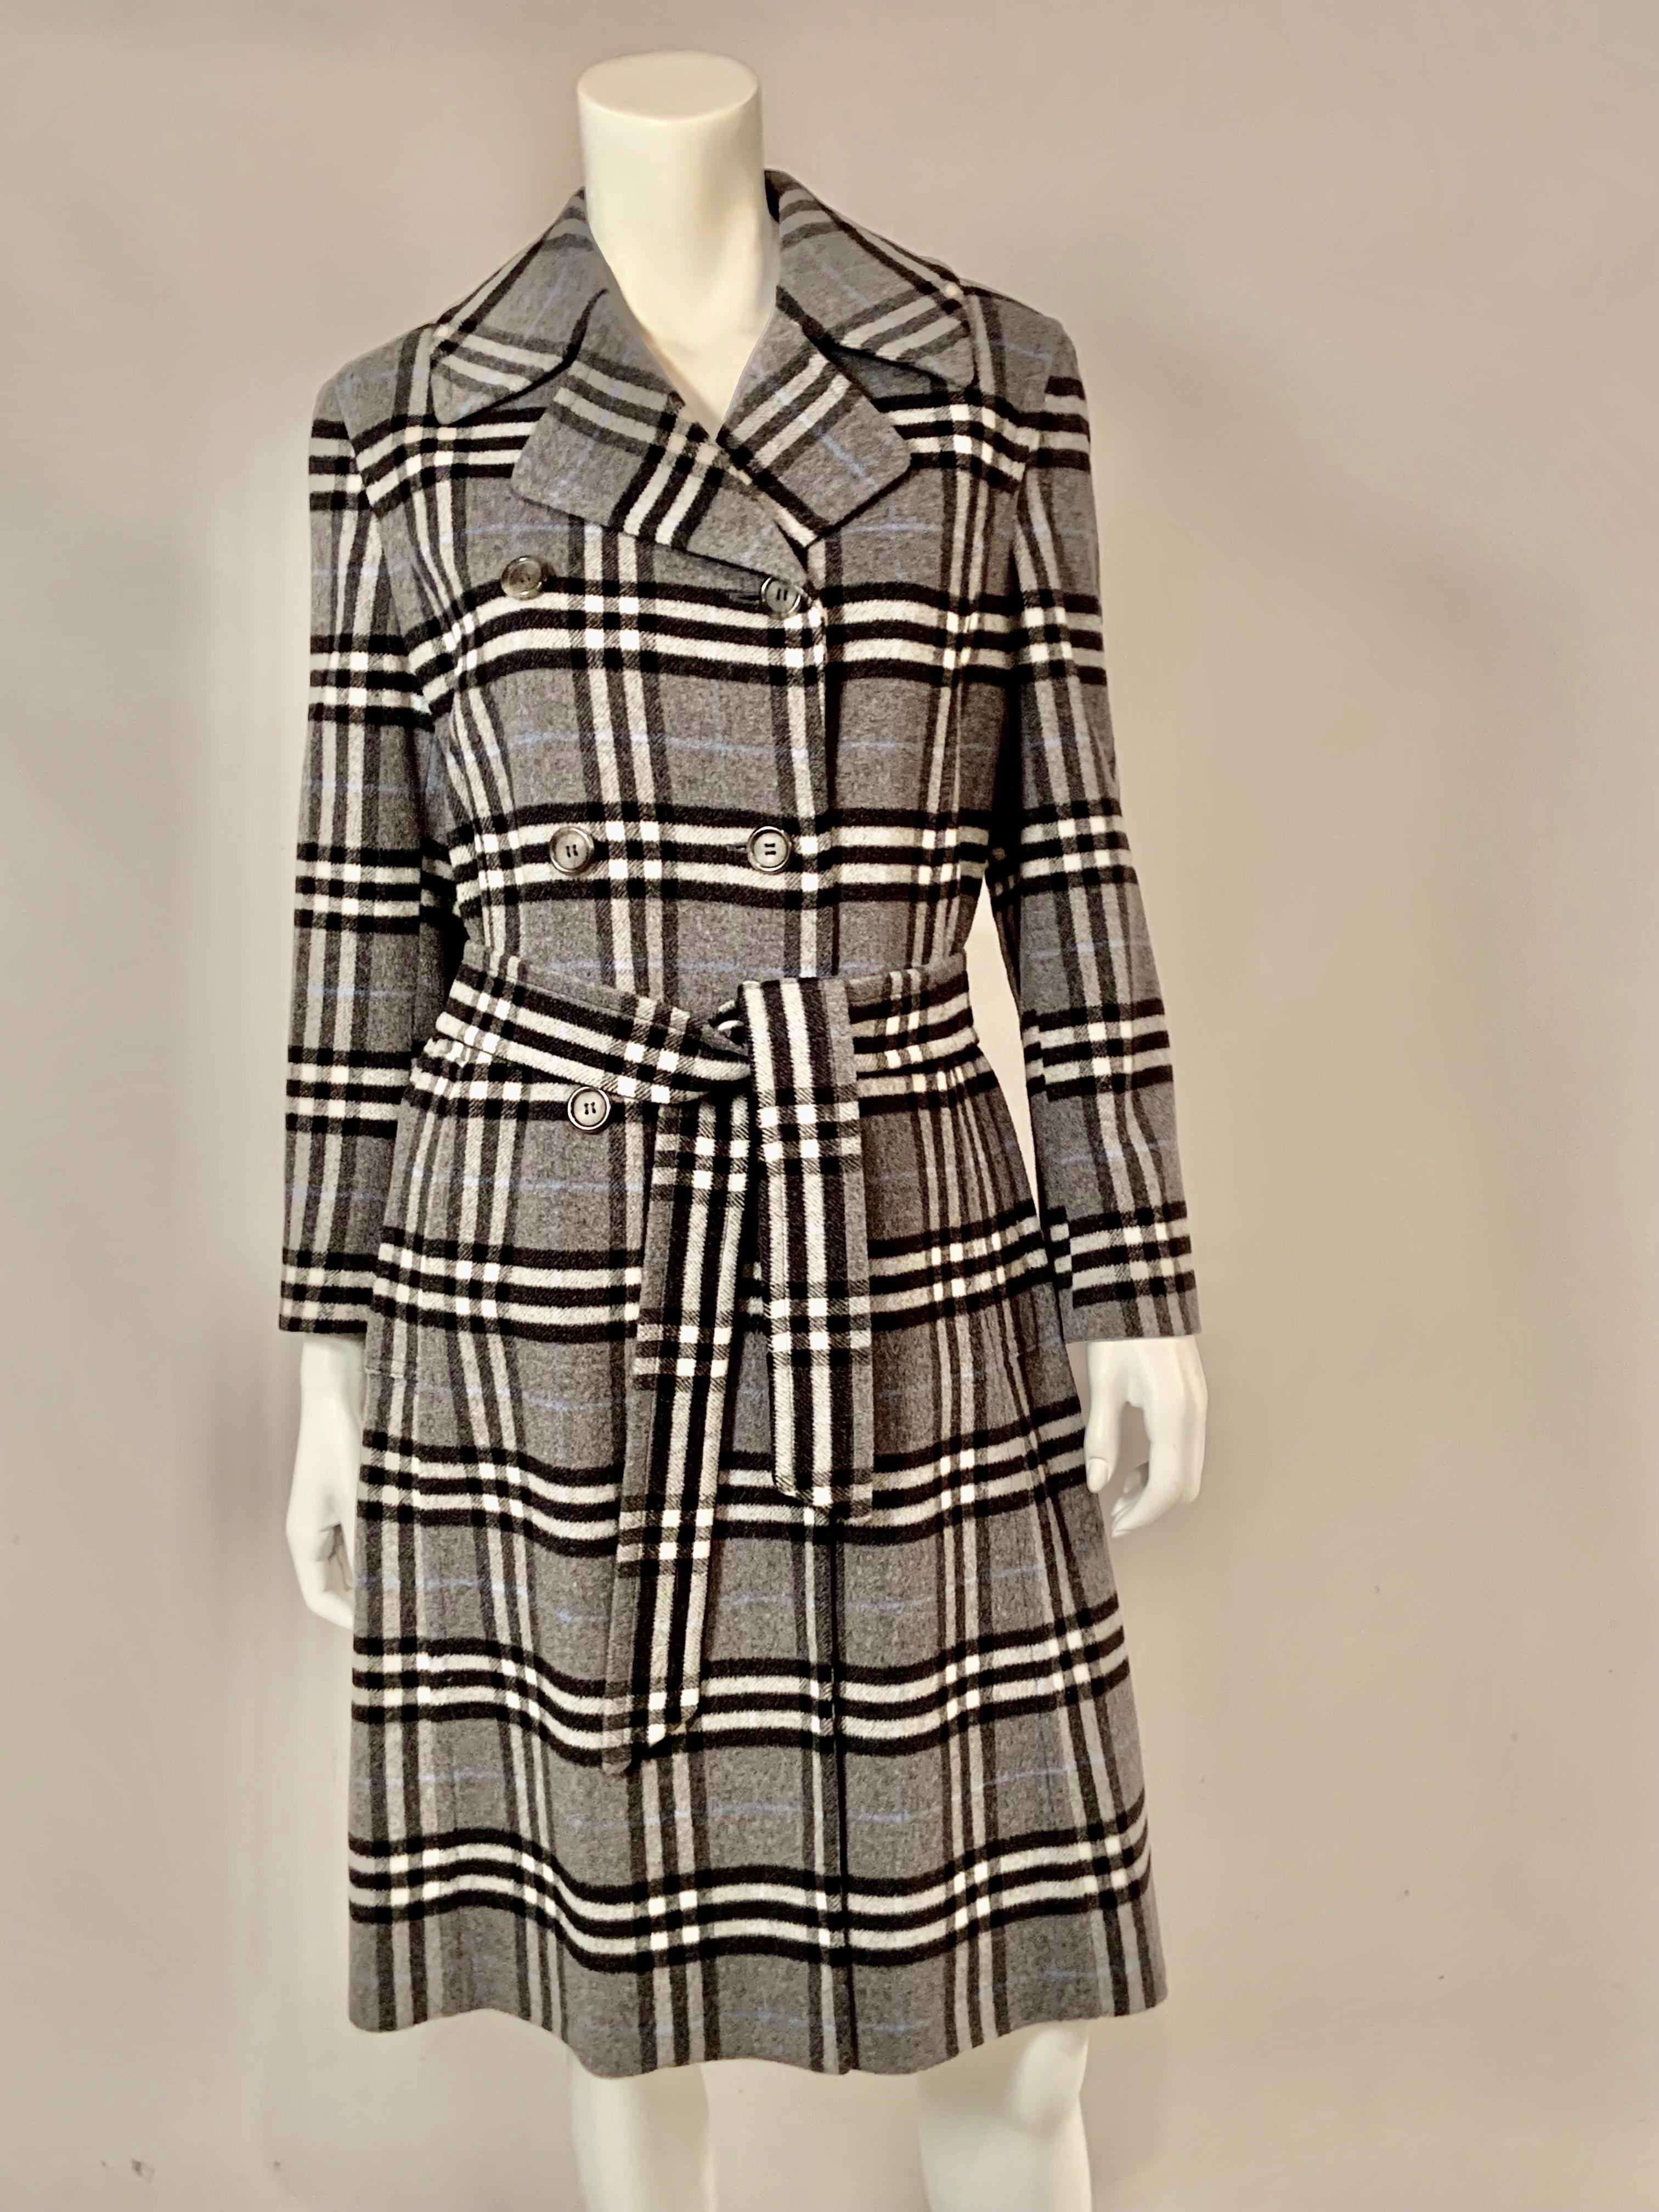 This classic Burberry London double breasted cashmere and wool blend coat looks as if it has never been worn. It is in pristine condition.  The grey plaid is accented with black, white and light blue.  The coat has notched lapels, two pockets and a